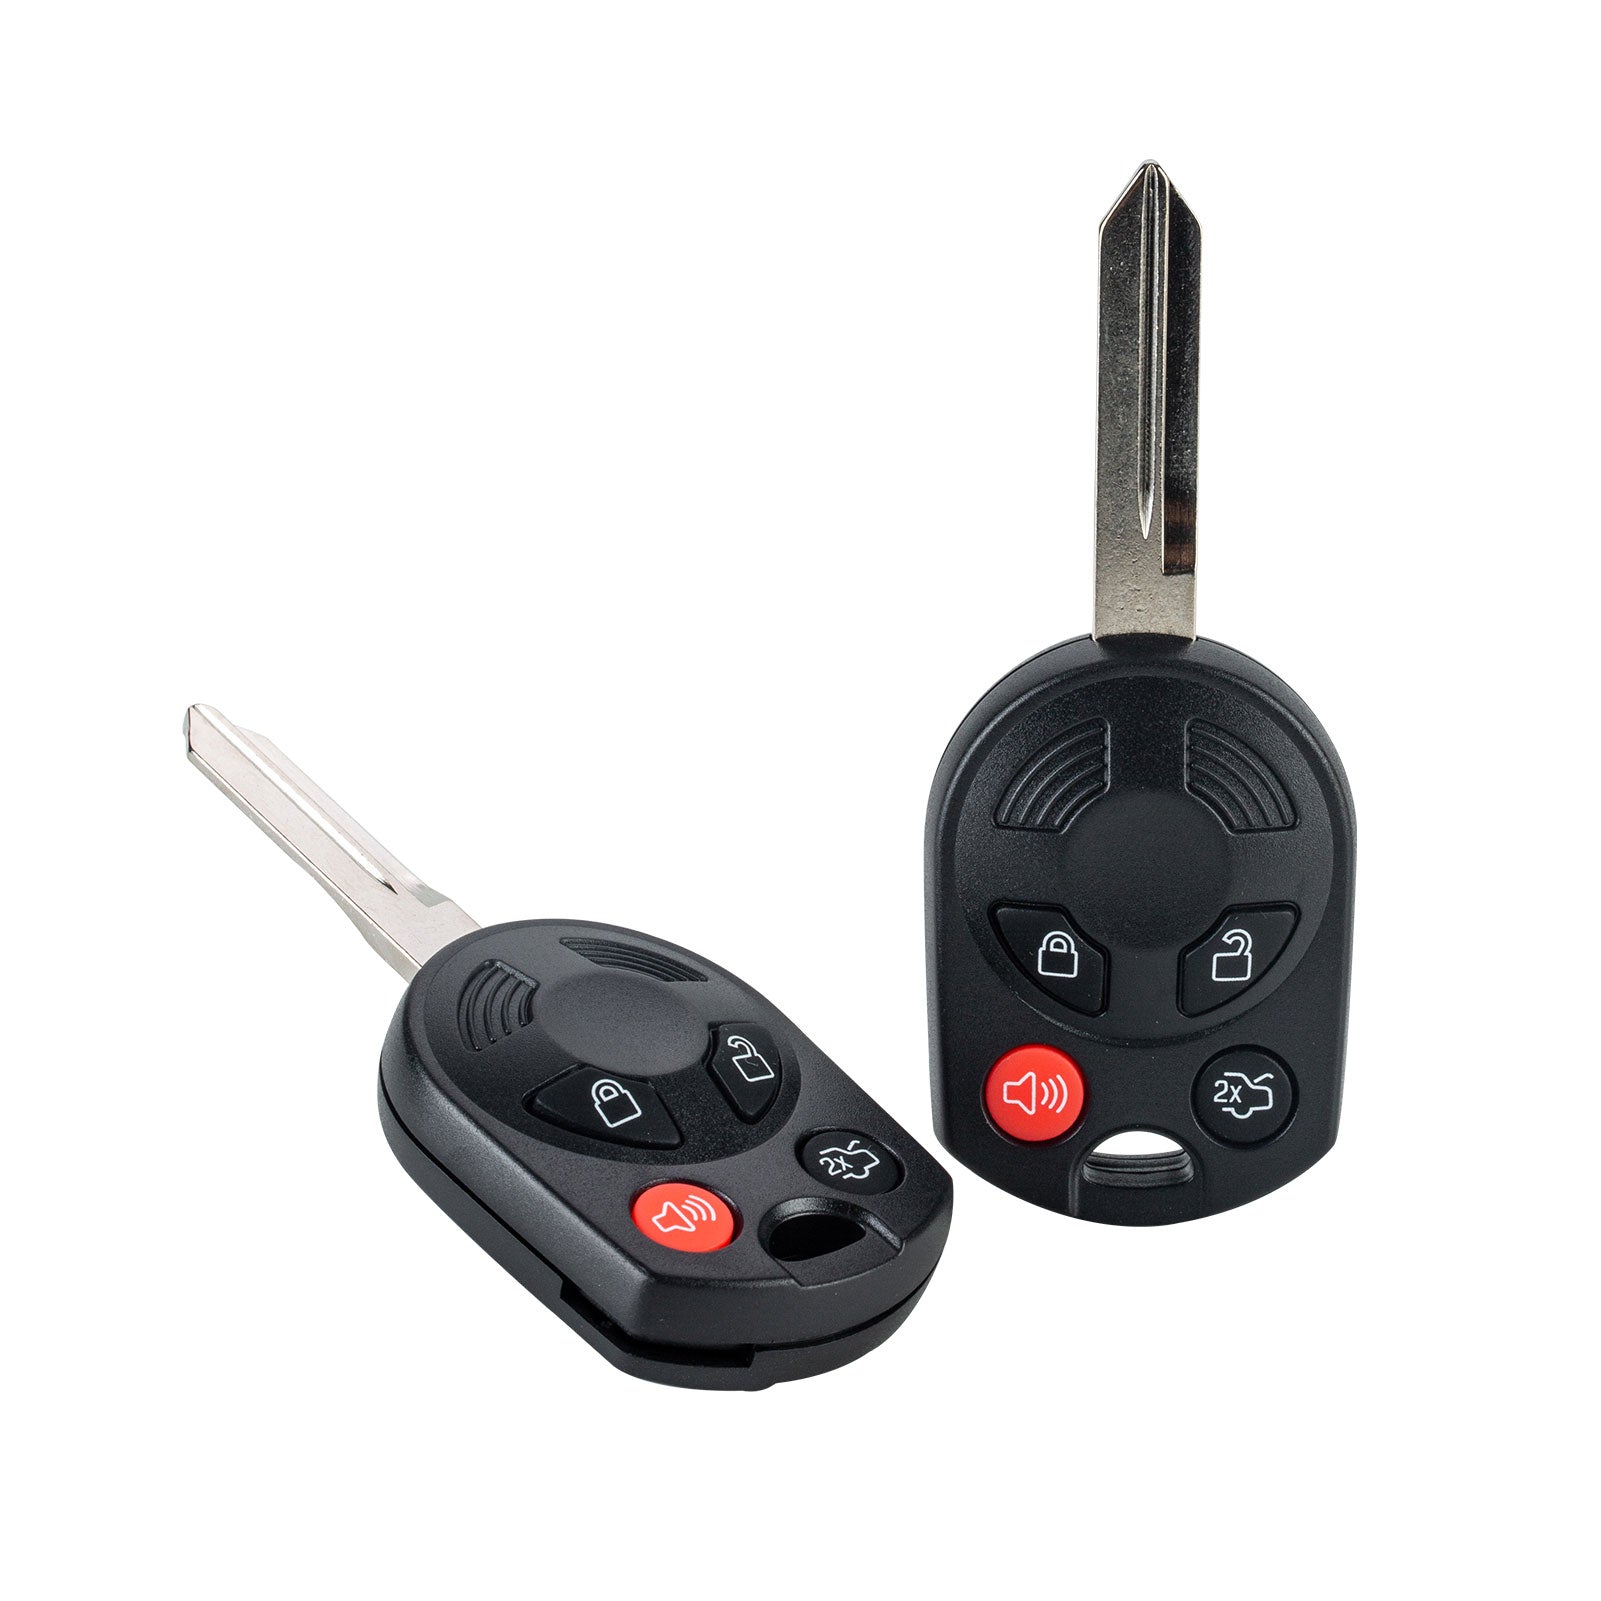 Keyless Entry Remote 315MHZ Replacement for 2005-2014 Mustang 2000-2016 Taurus 2005-2011 Town Car 80 CHIP OUCD6000022  KR-F4SA